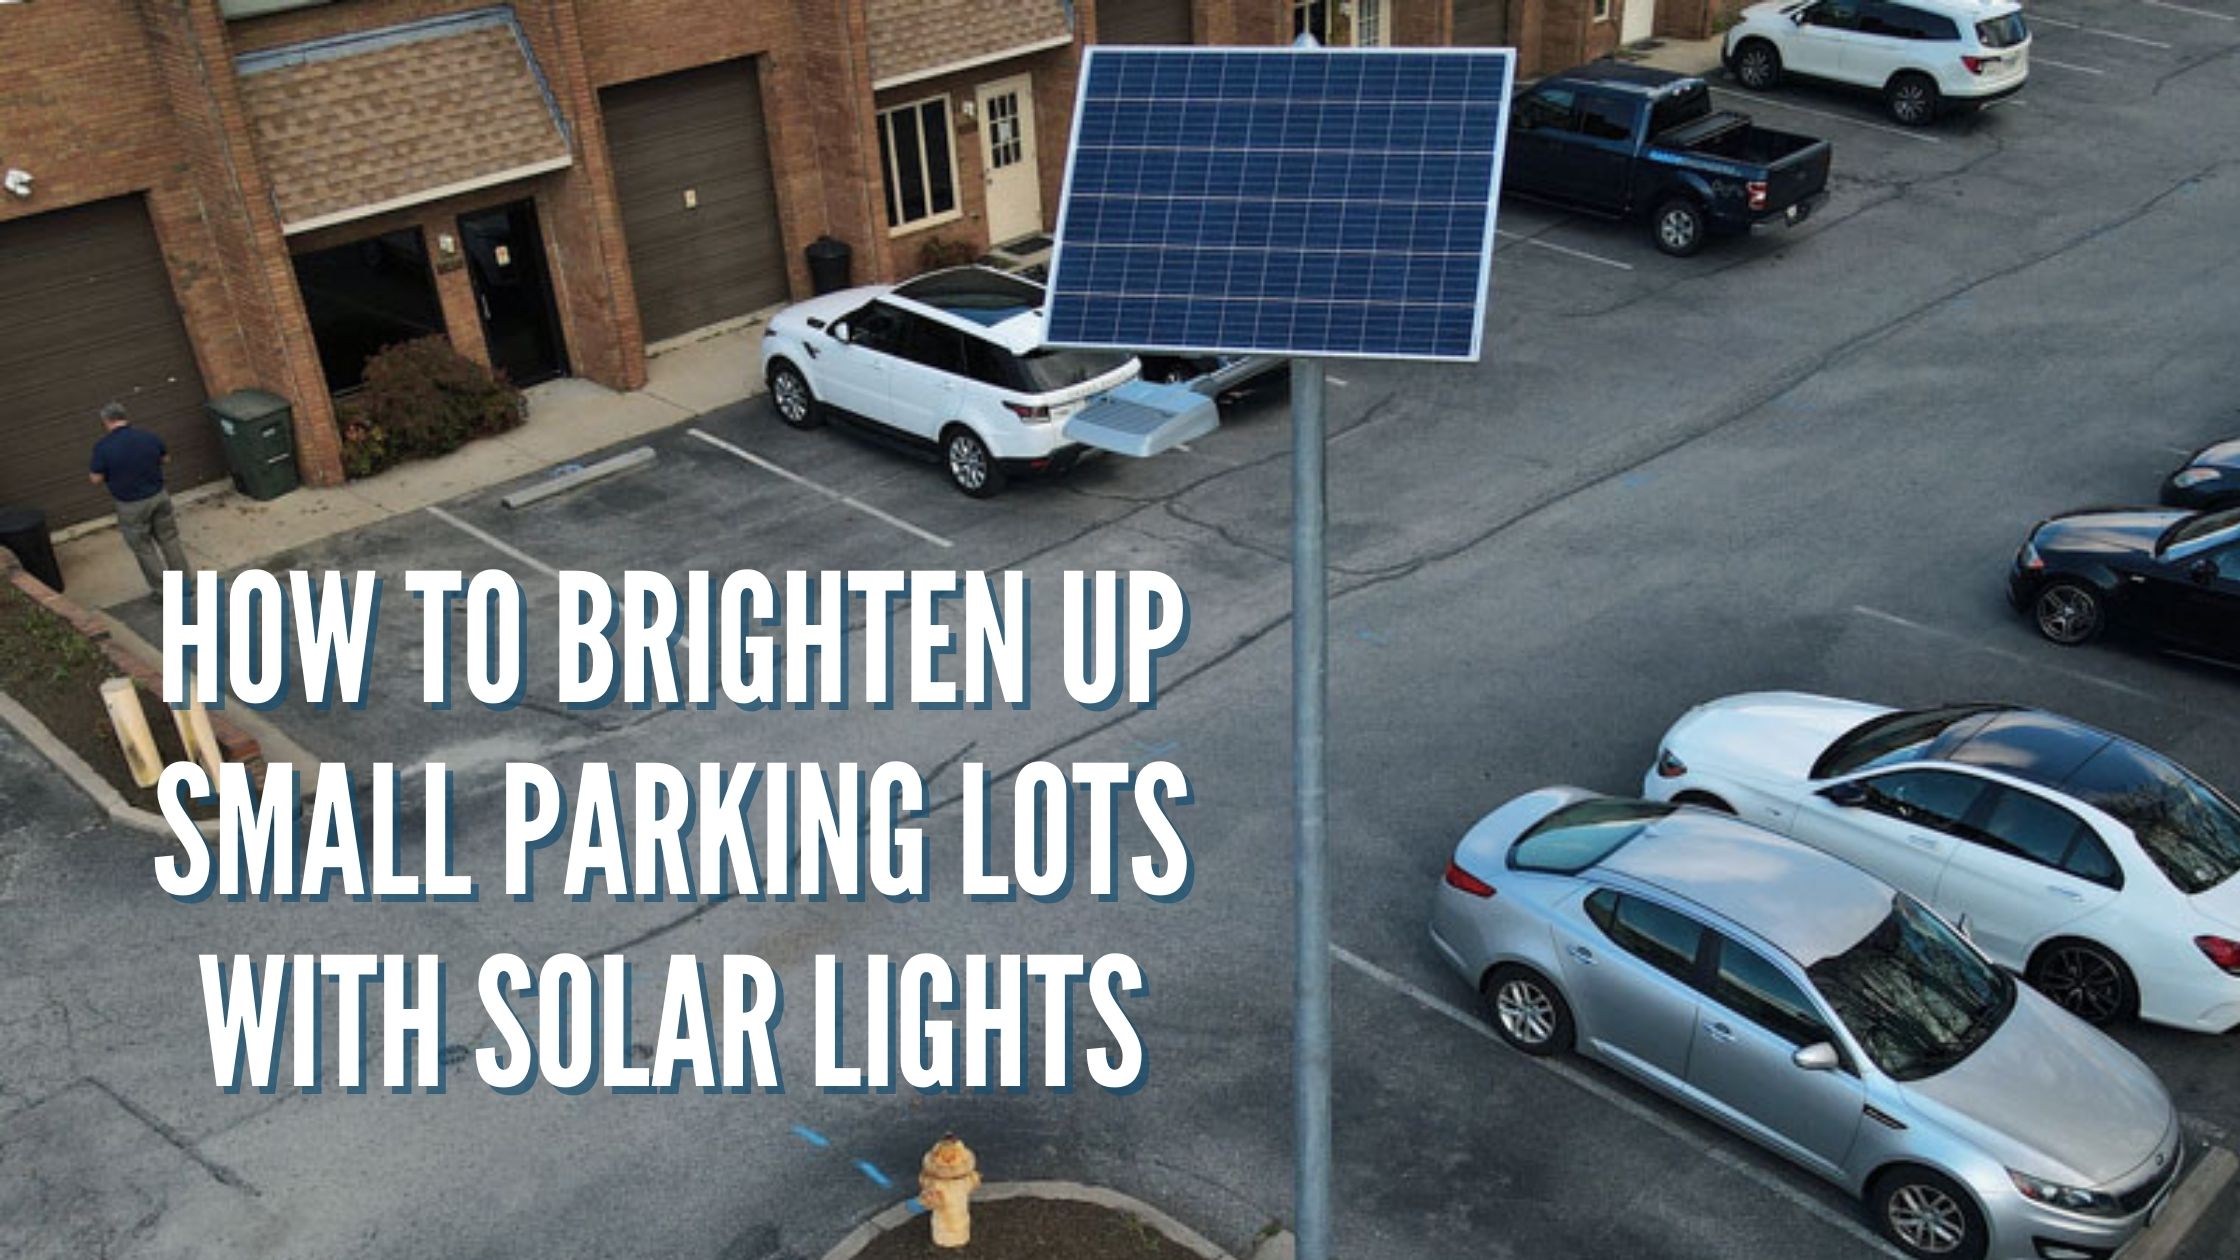 How To Brighten Up Small Parking Lots With Solar Lights